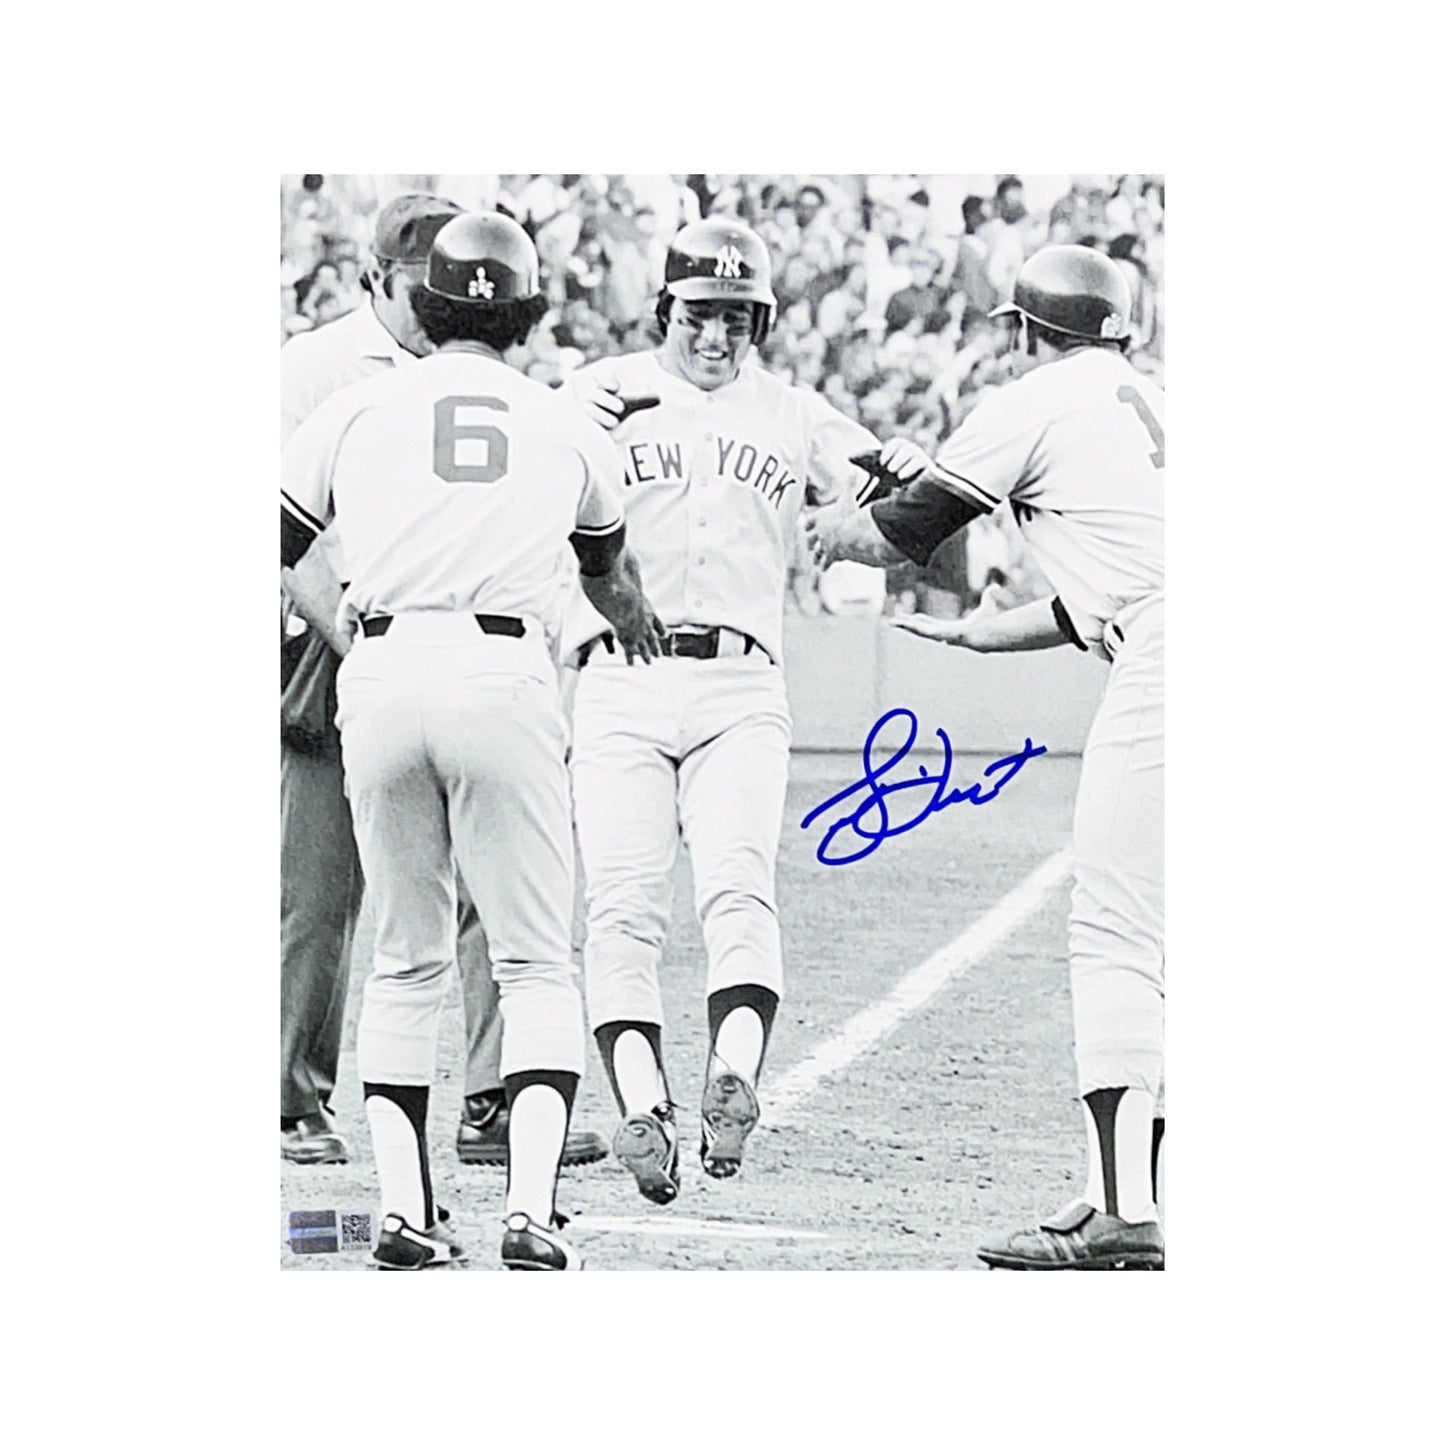 Bucky Dent Autographed New York Yankees Crossing Home Plate 8x10 Steiner CX